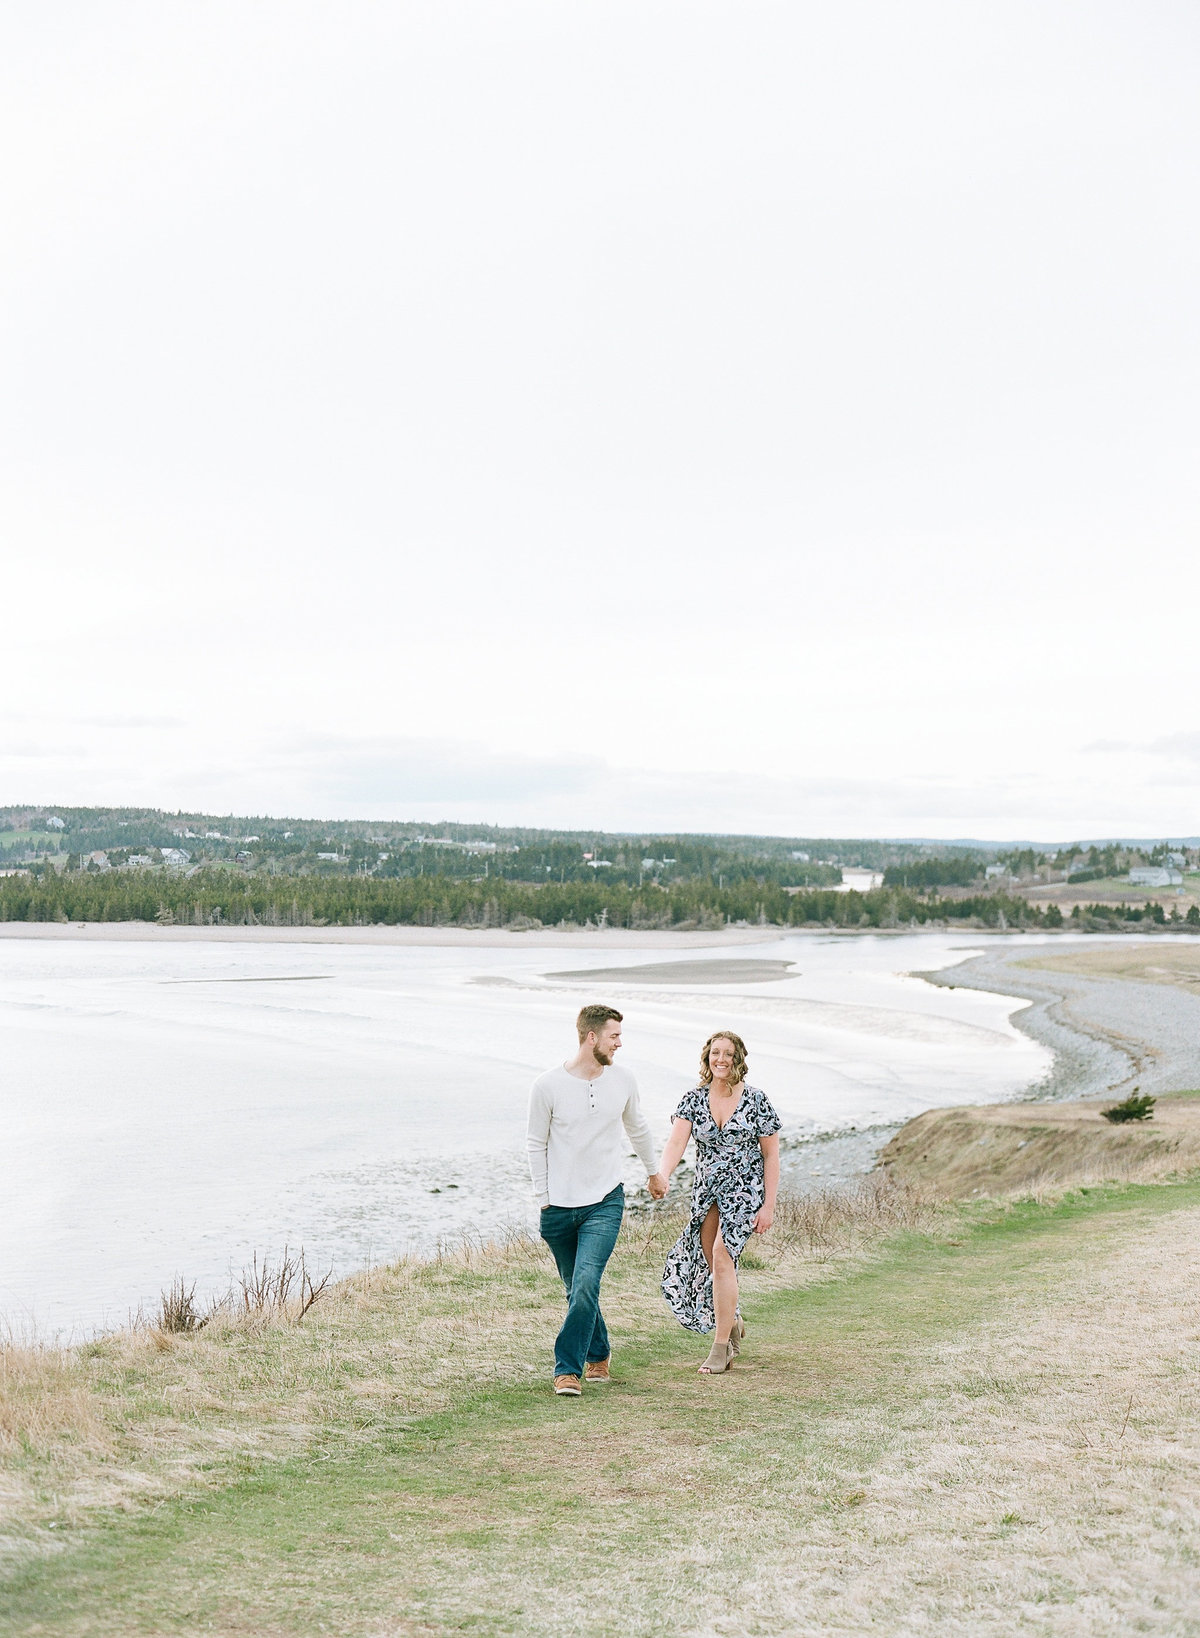 Jacqueline Anne Photography - Akayla and Andrew - Lawrencetown Beach-76